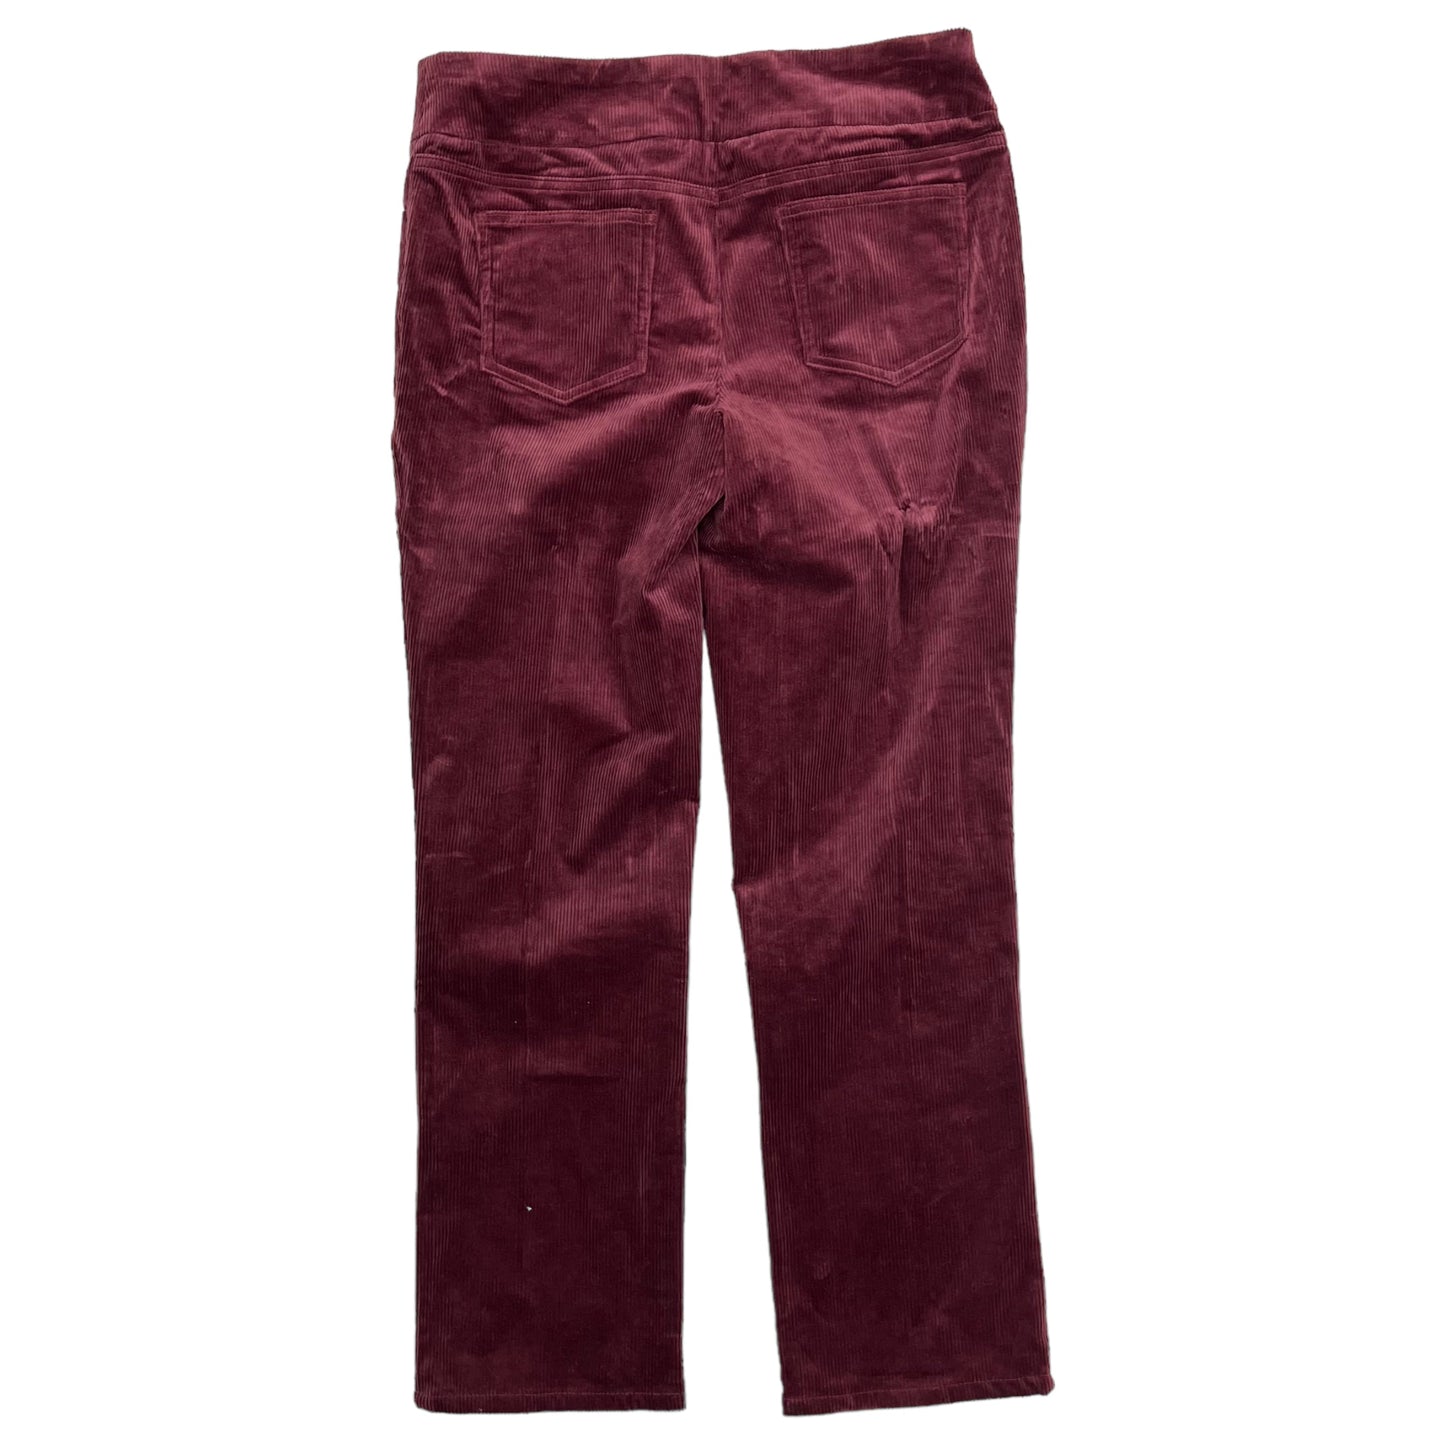 Pants Corduroy By Denim And Company  Size: 14